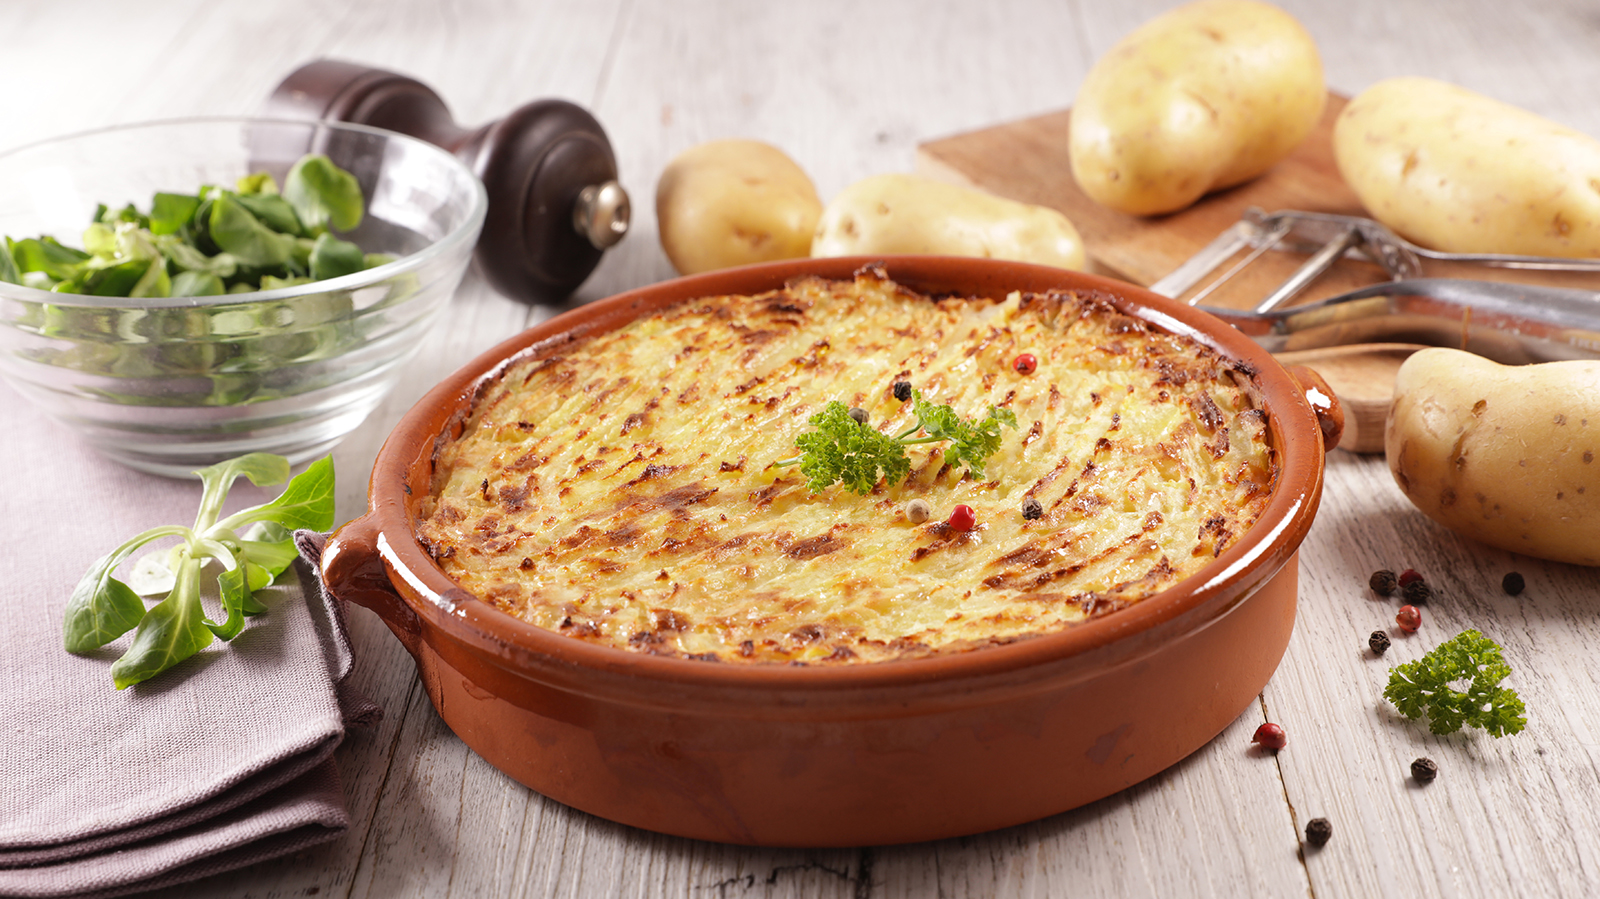 baked potato, minced beef- traditional hachis parmentier- shepherd's